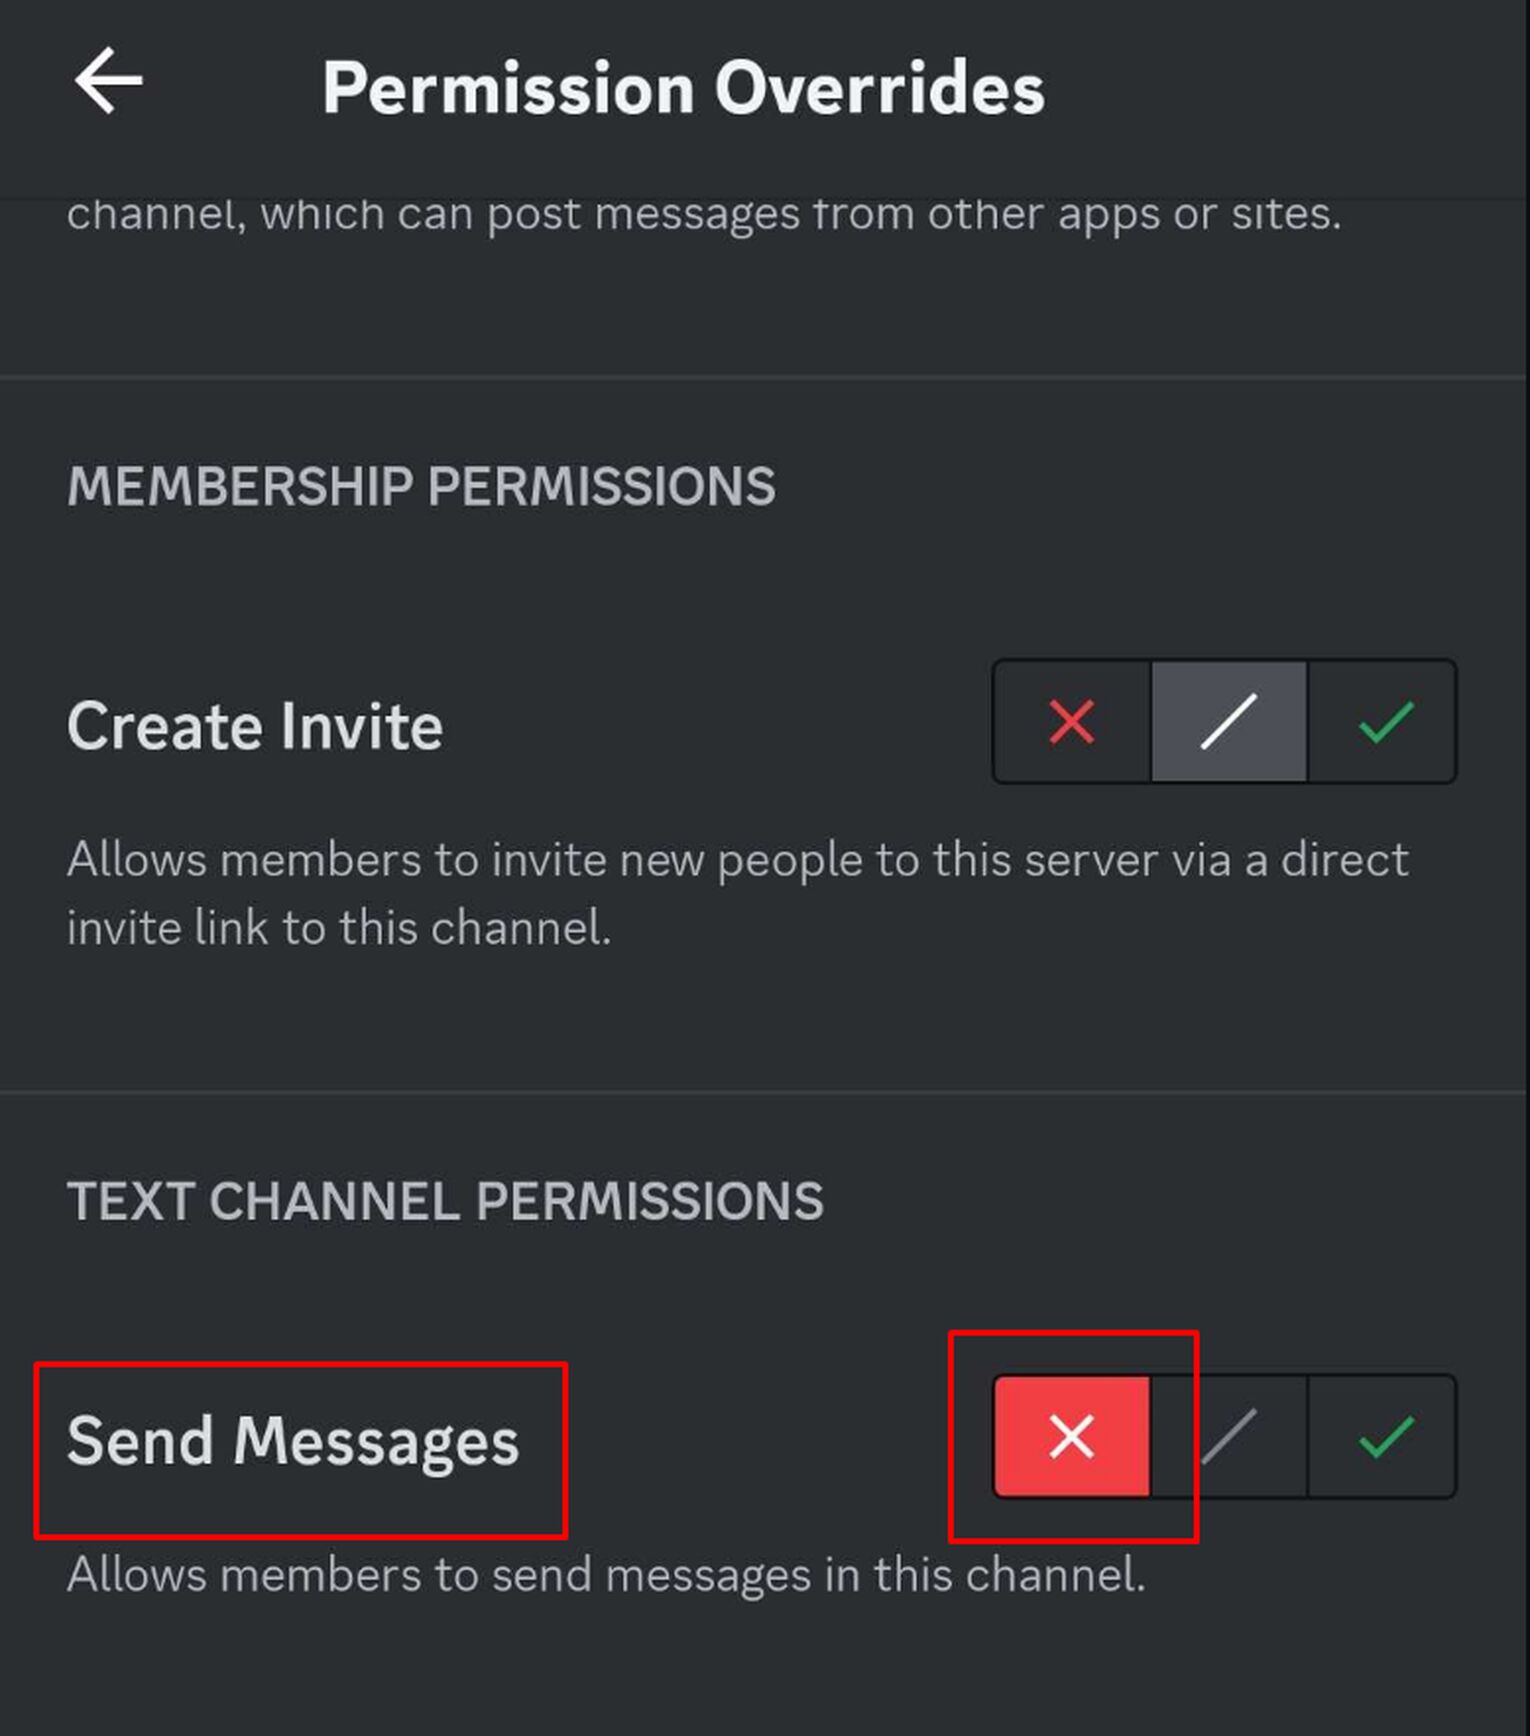 Clicking The X Button On Send Messages